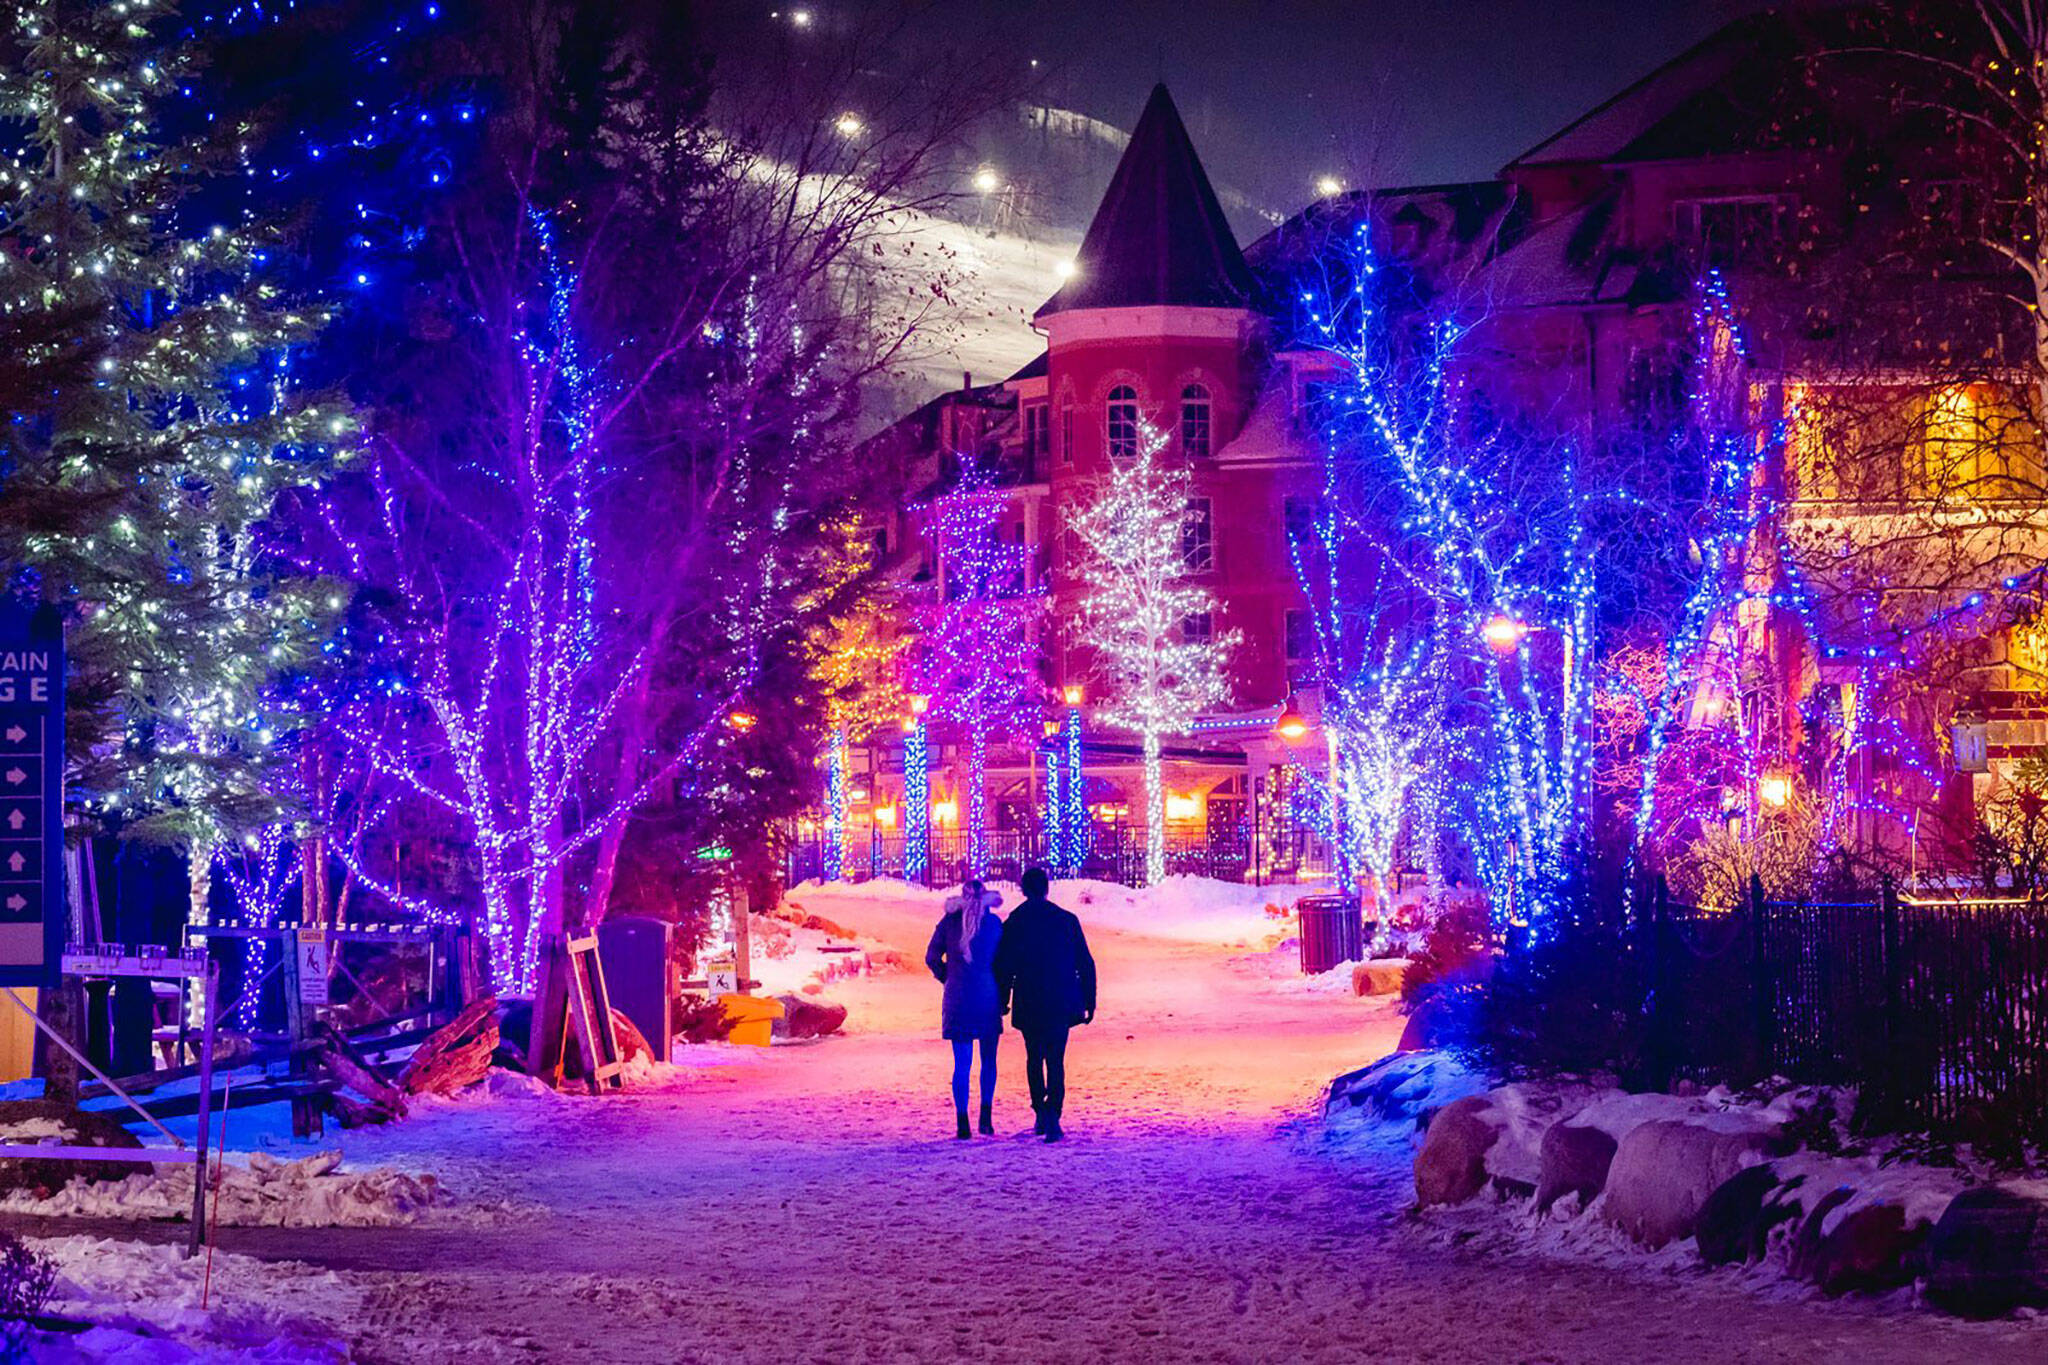 Blue Mountain is transforming into a winter wonderland